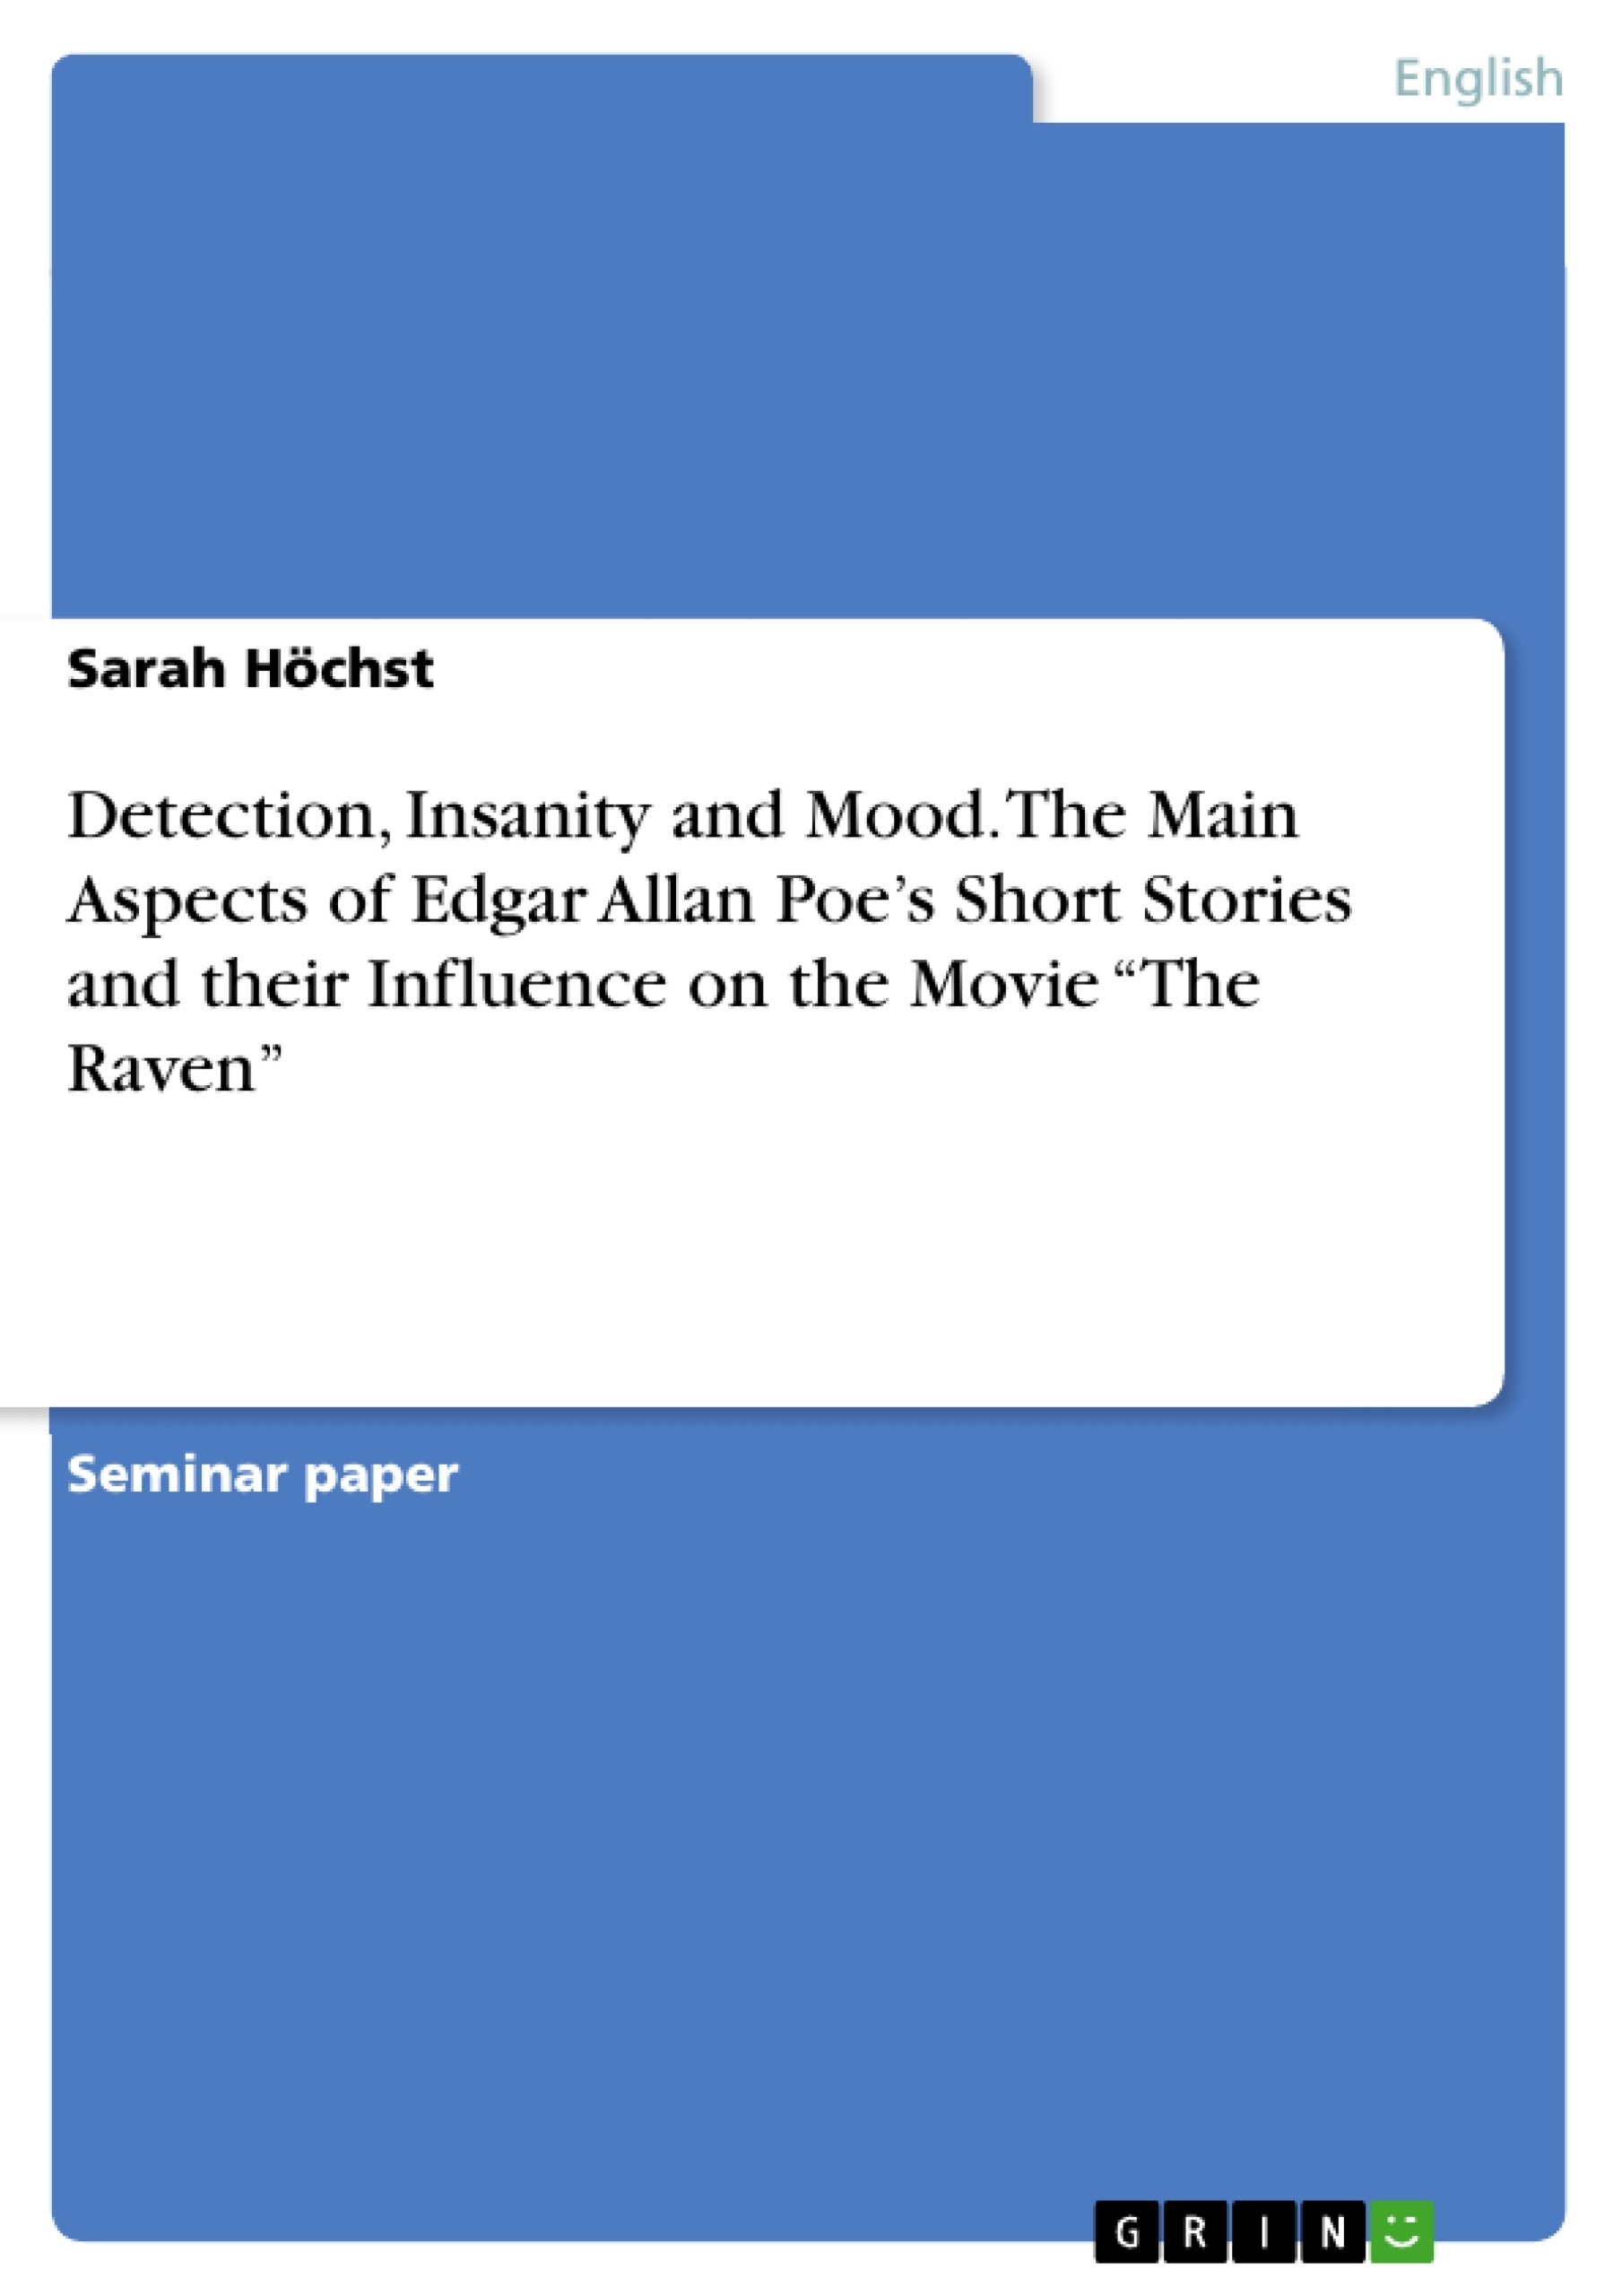 Title: Detection, Insanity and Mood. The Main Aspects of Edgar Allan Poe’s Short Stories and their Influence on the Movie “The Raven”